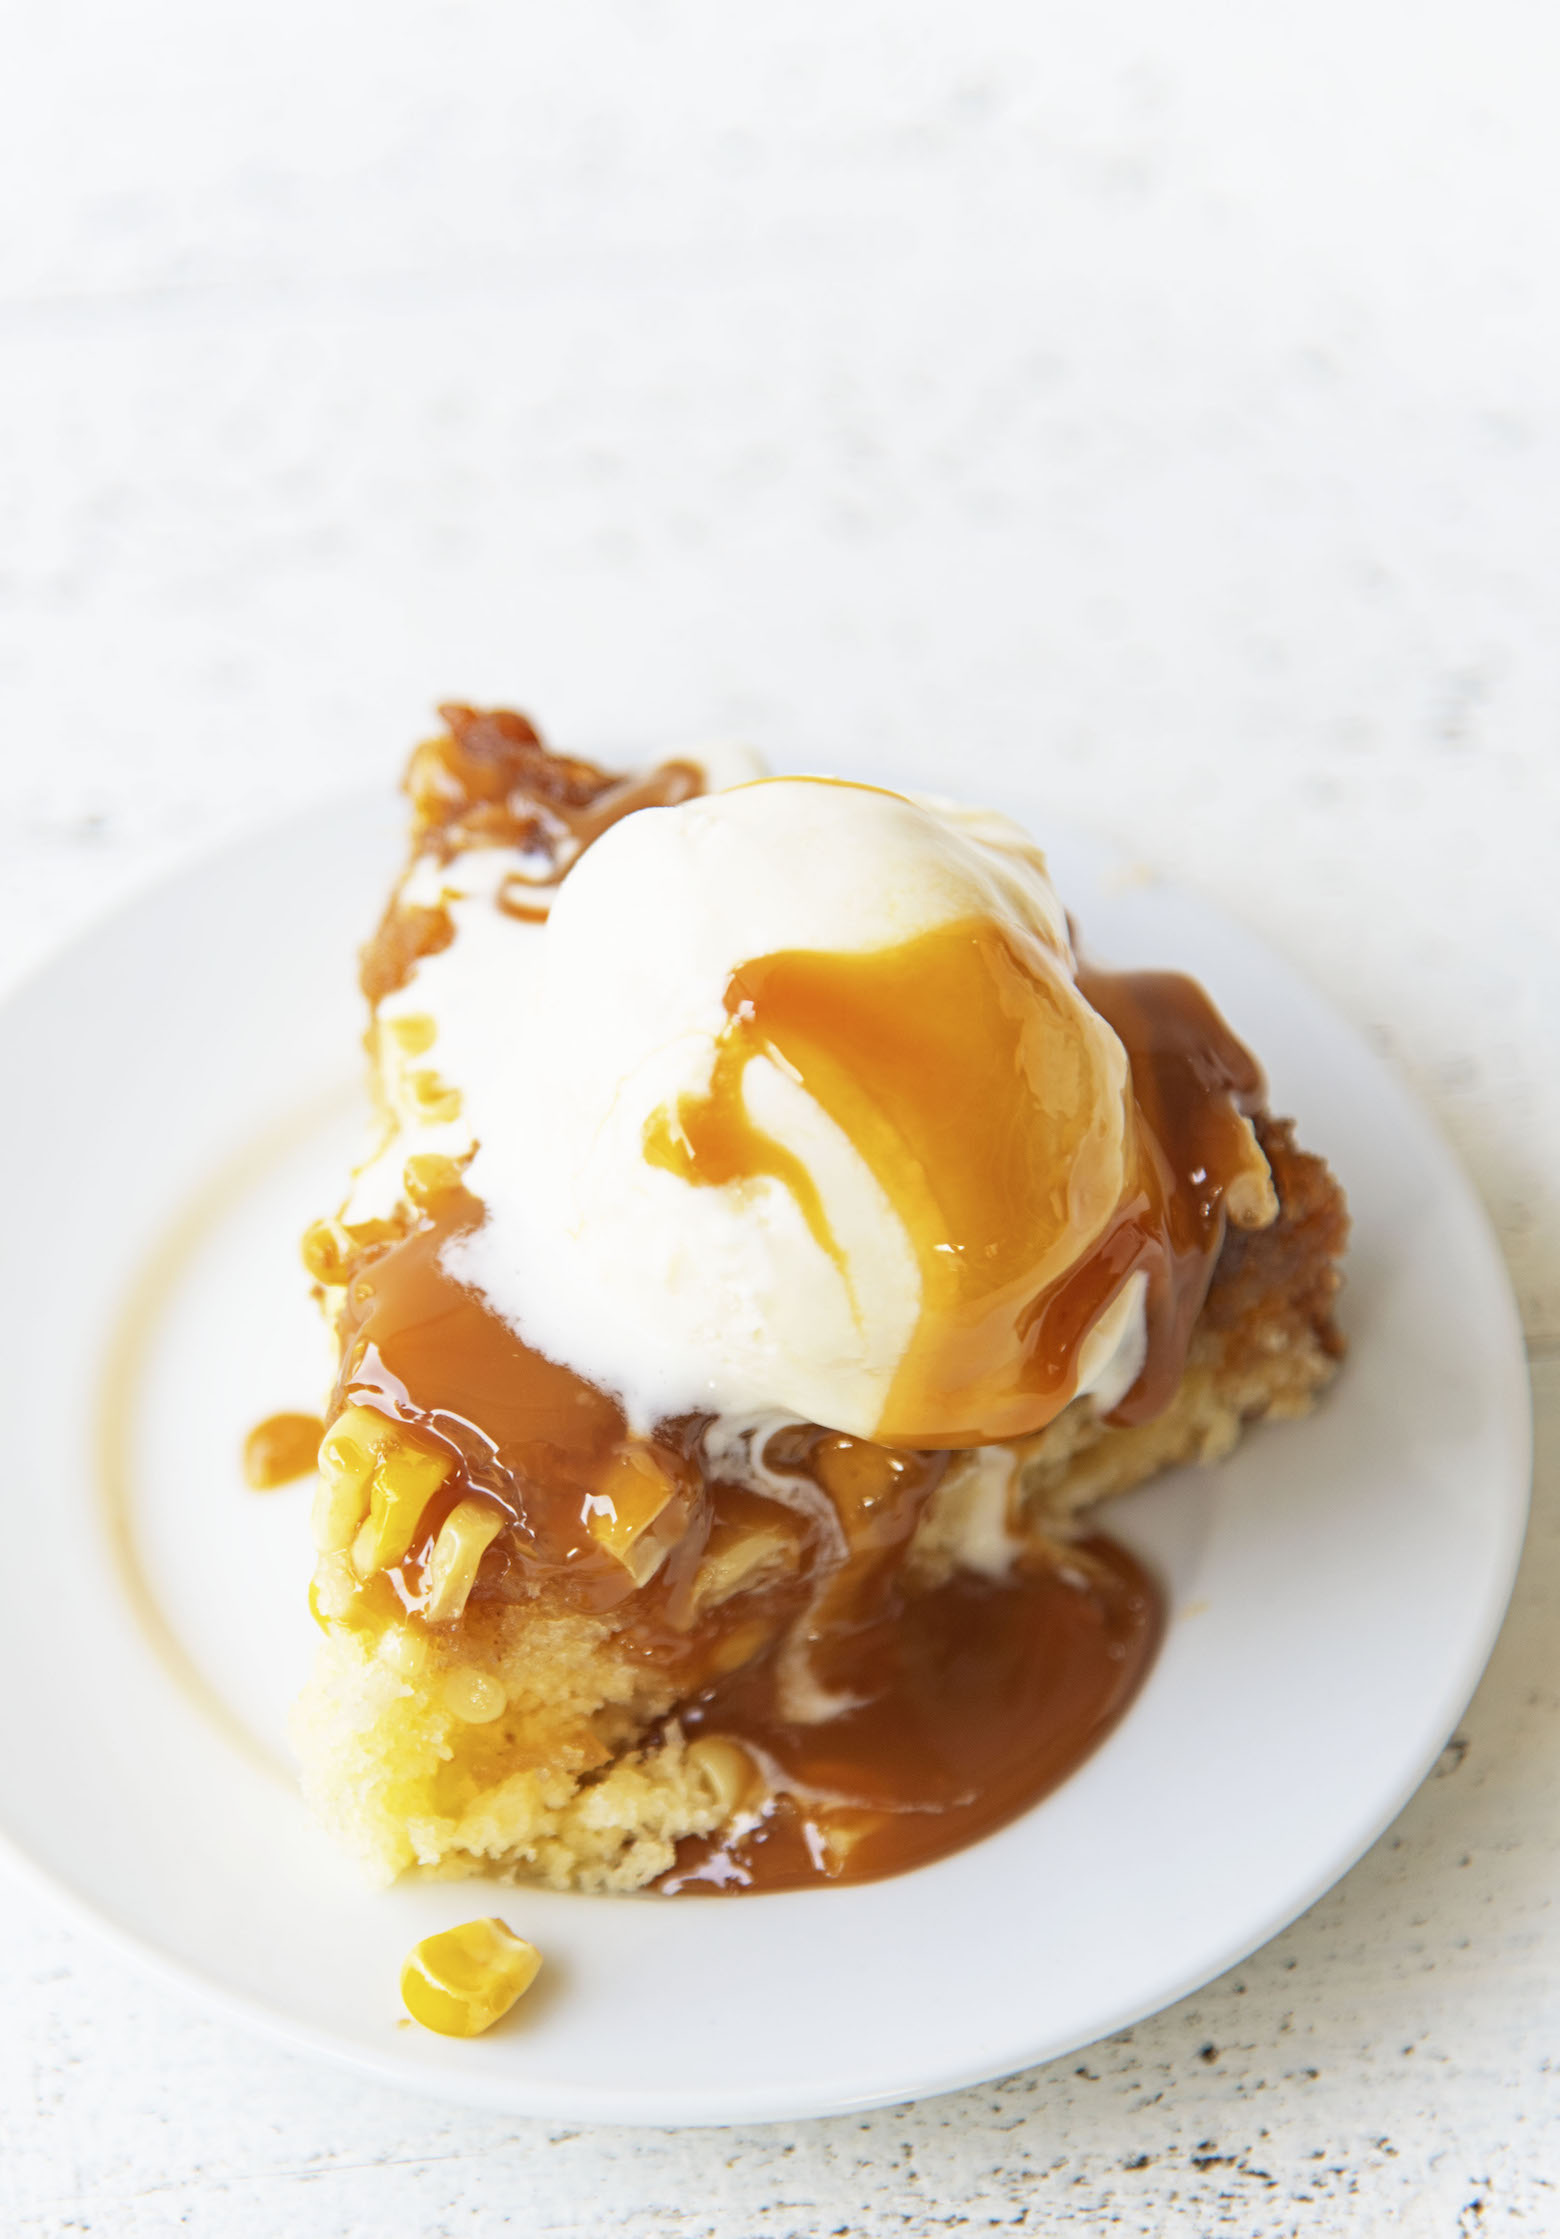 Three quarter shot of a single piece of upside down cake with ice cream and caramel sauce.